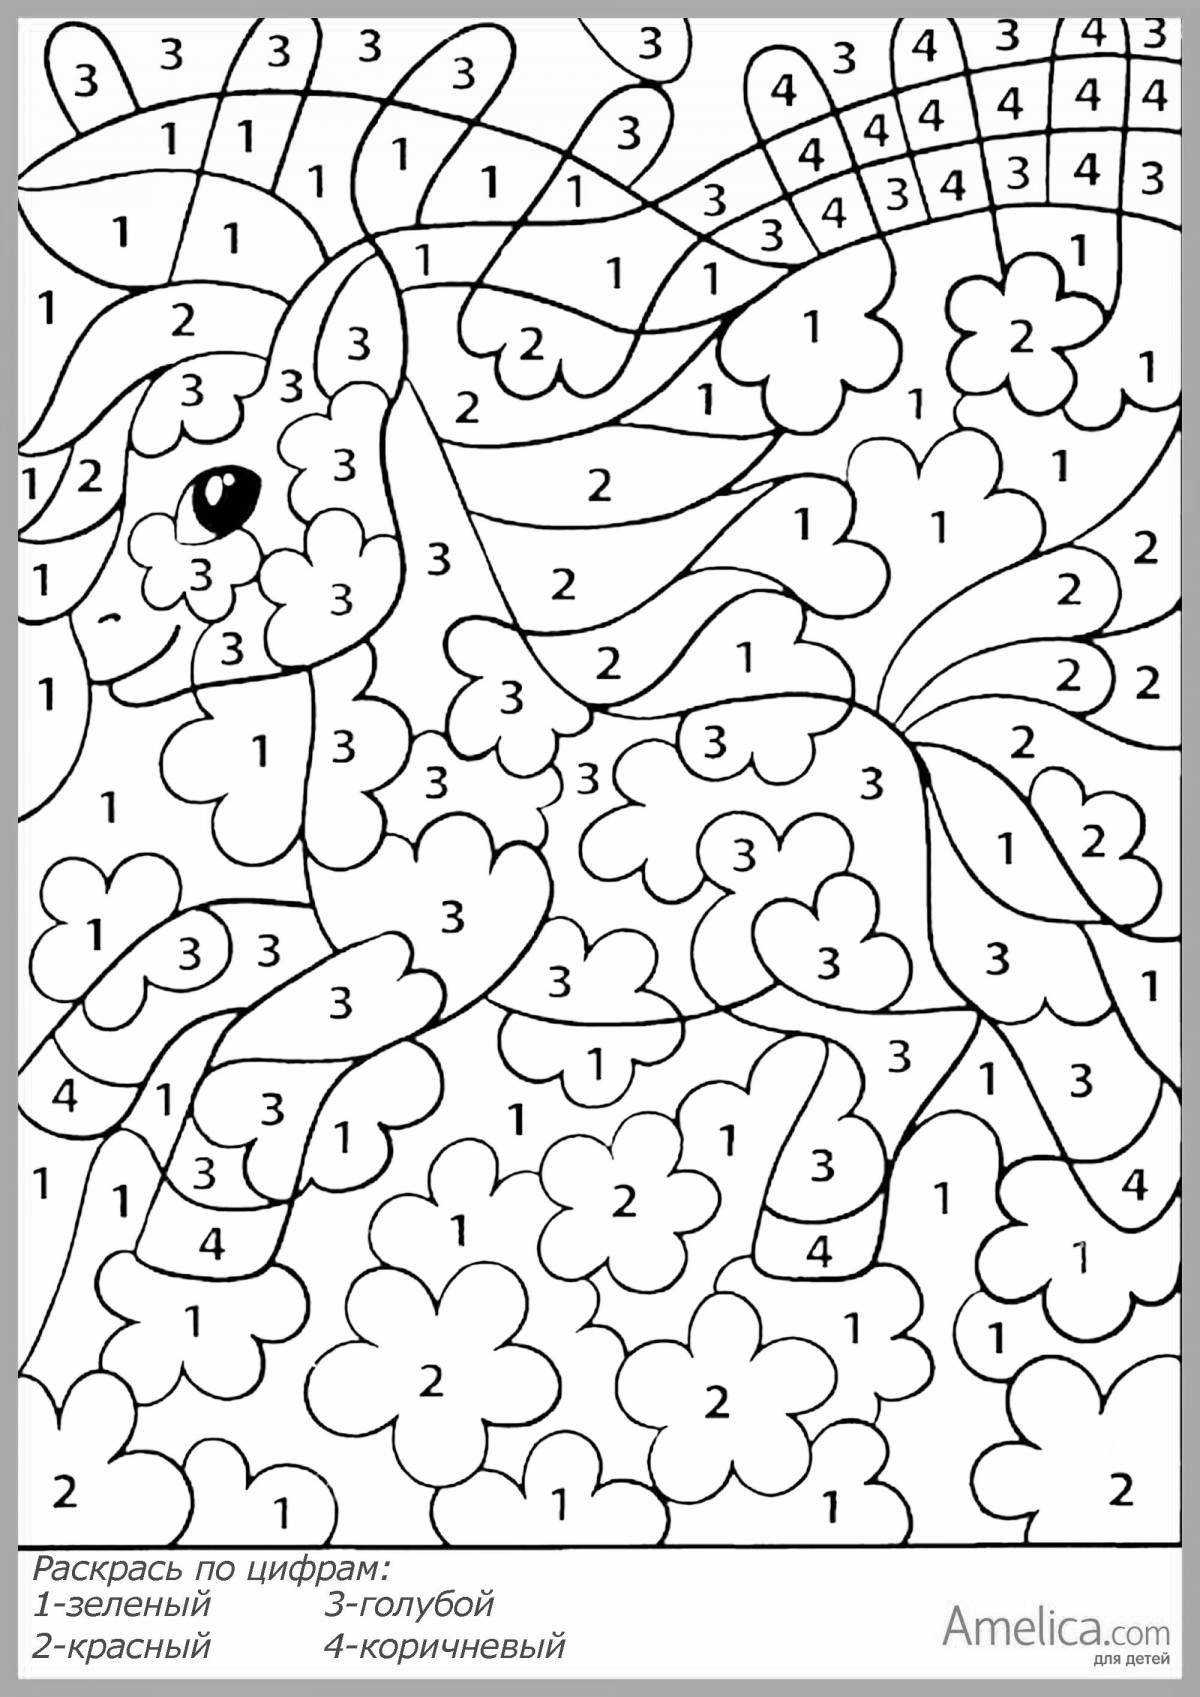 Fun coloring picture for 9 year olds